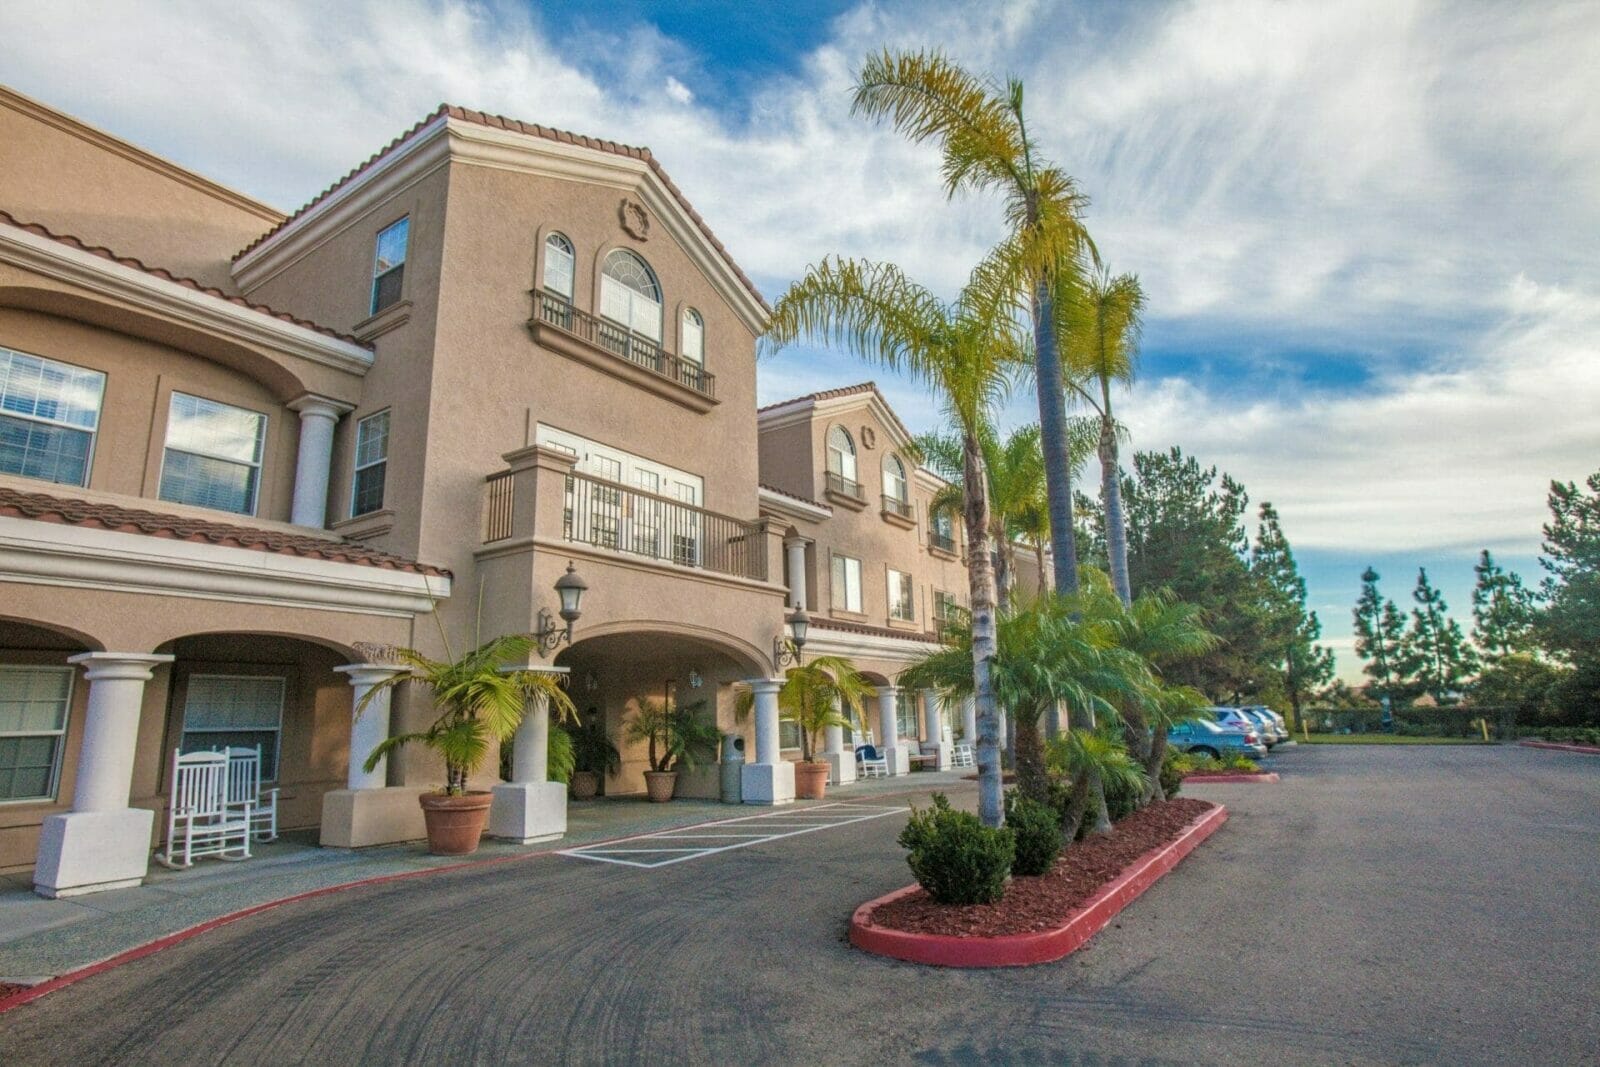 Torrey Pines Senior & Assisted Living in San Diego